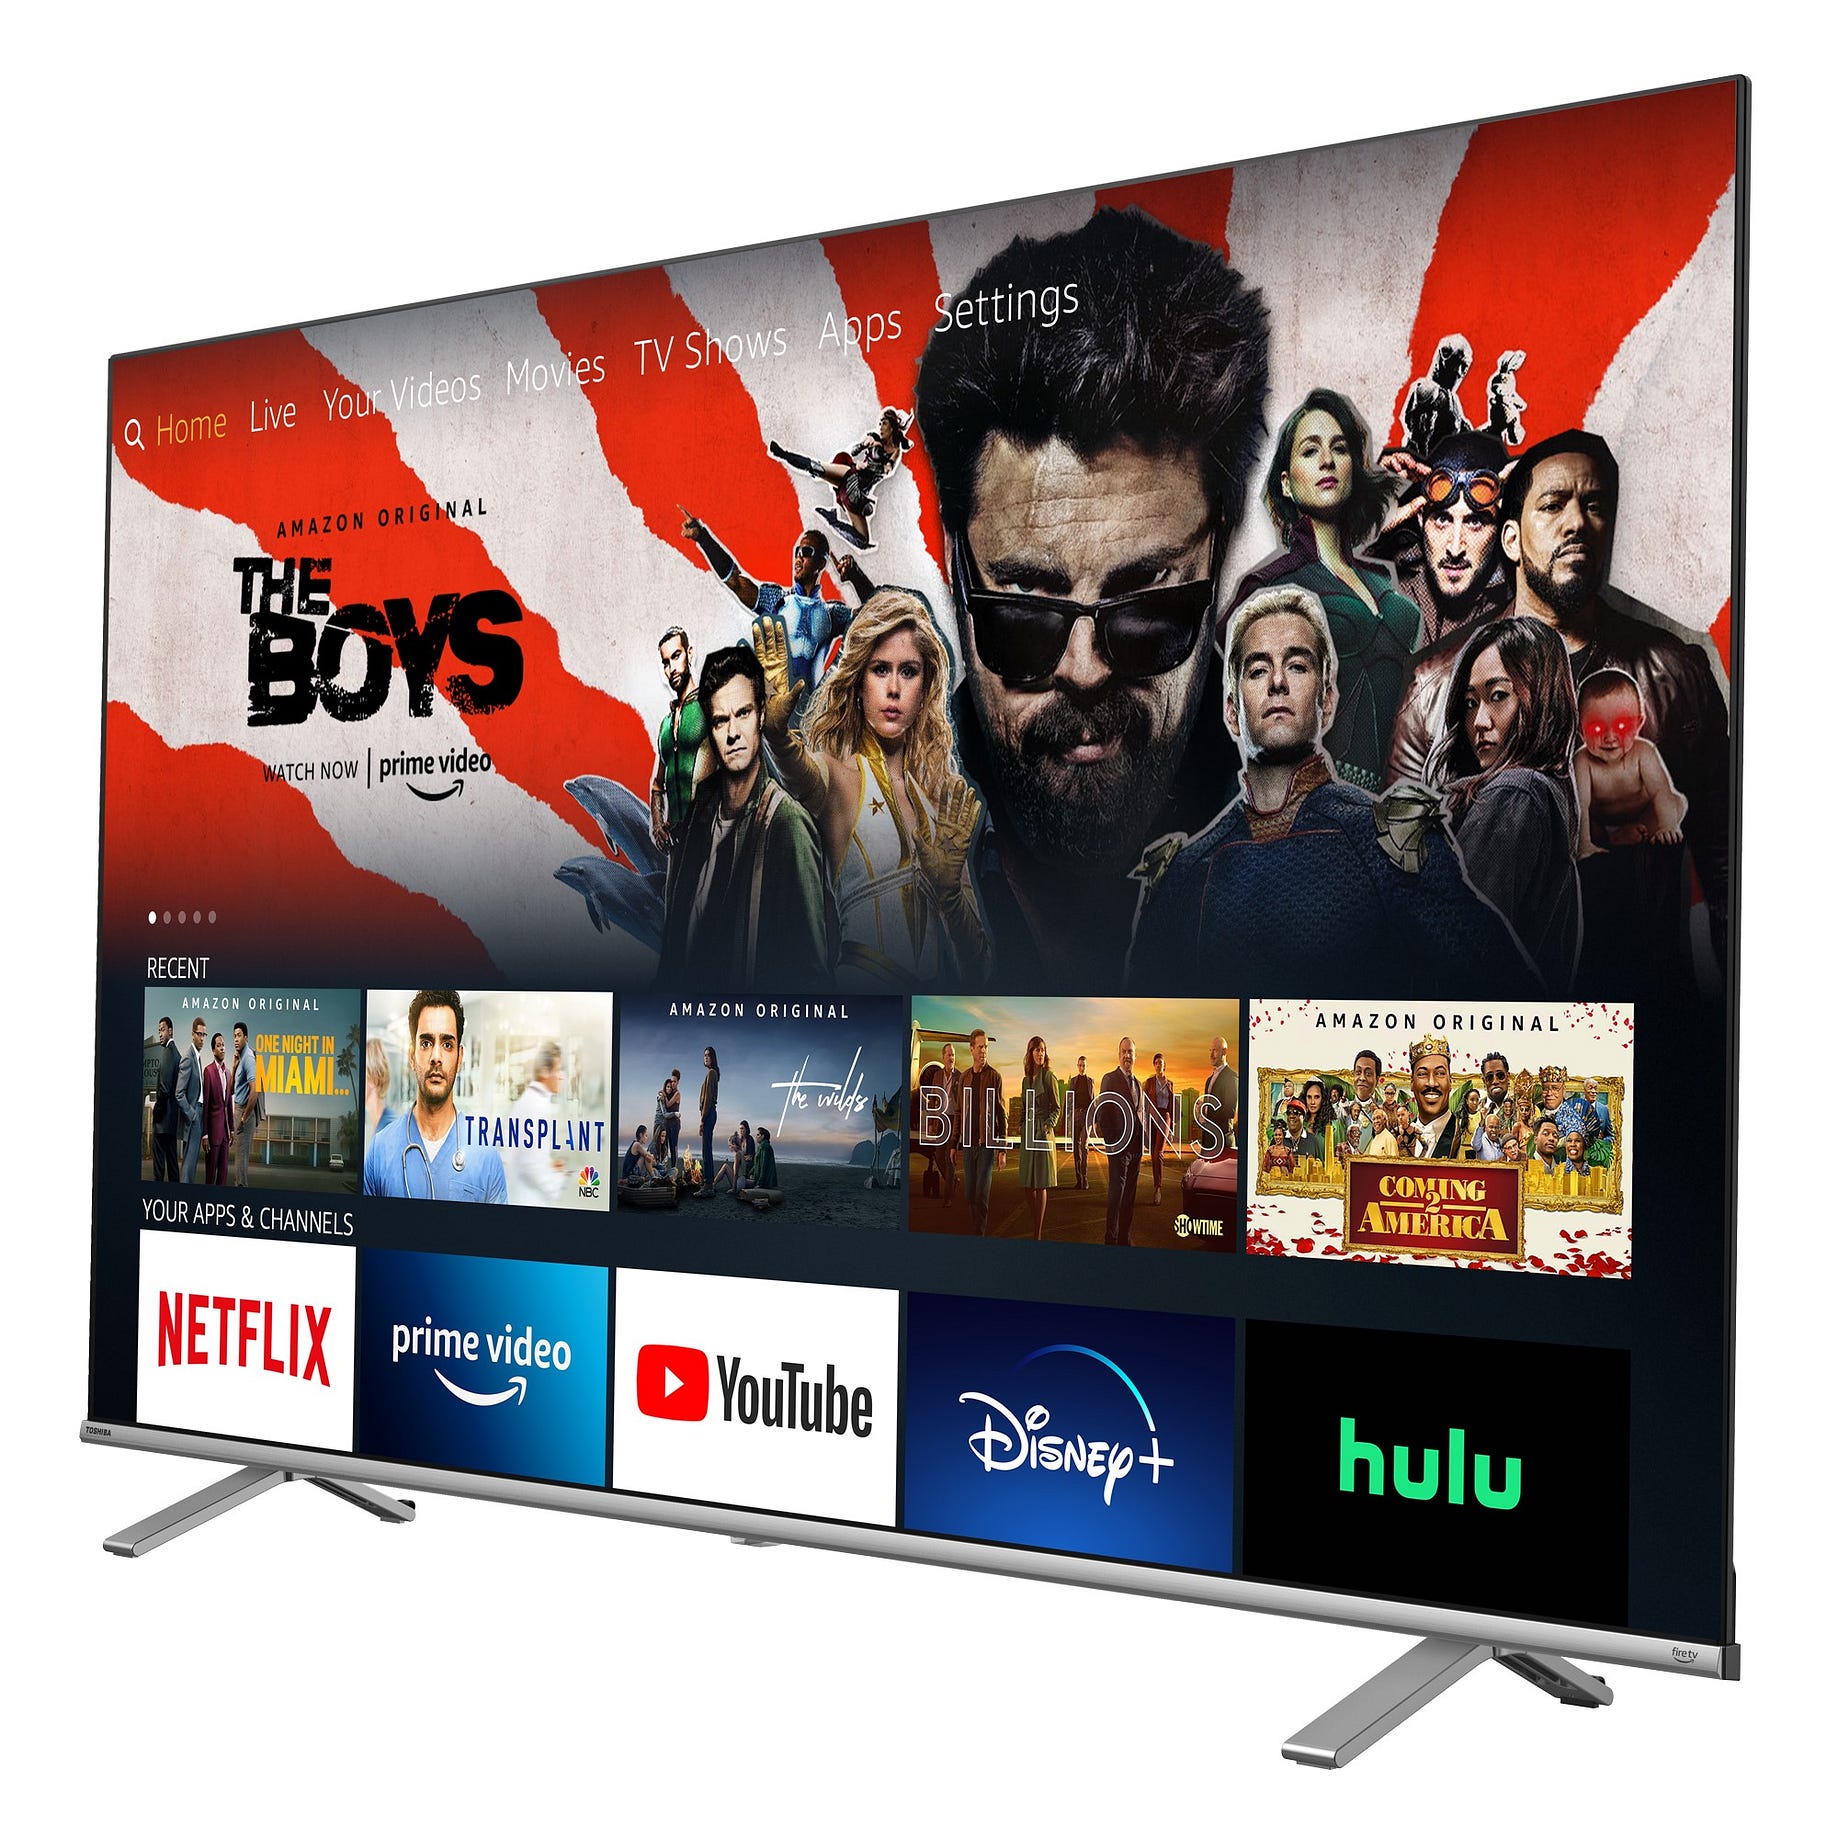 Introducing A New Lineup Of Toshiba Smart Fire Tvs By Amazon Fire Tv Amazon Fire Tv